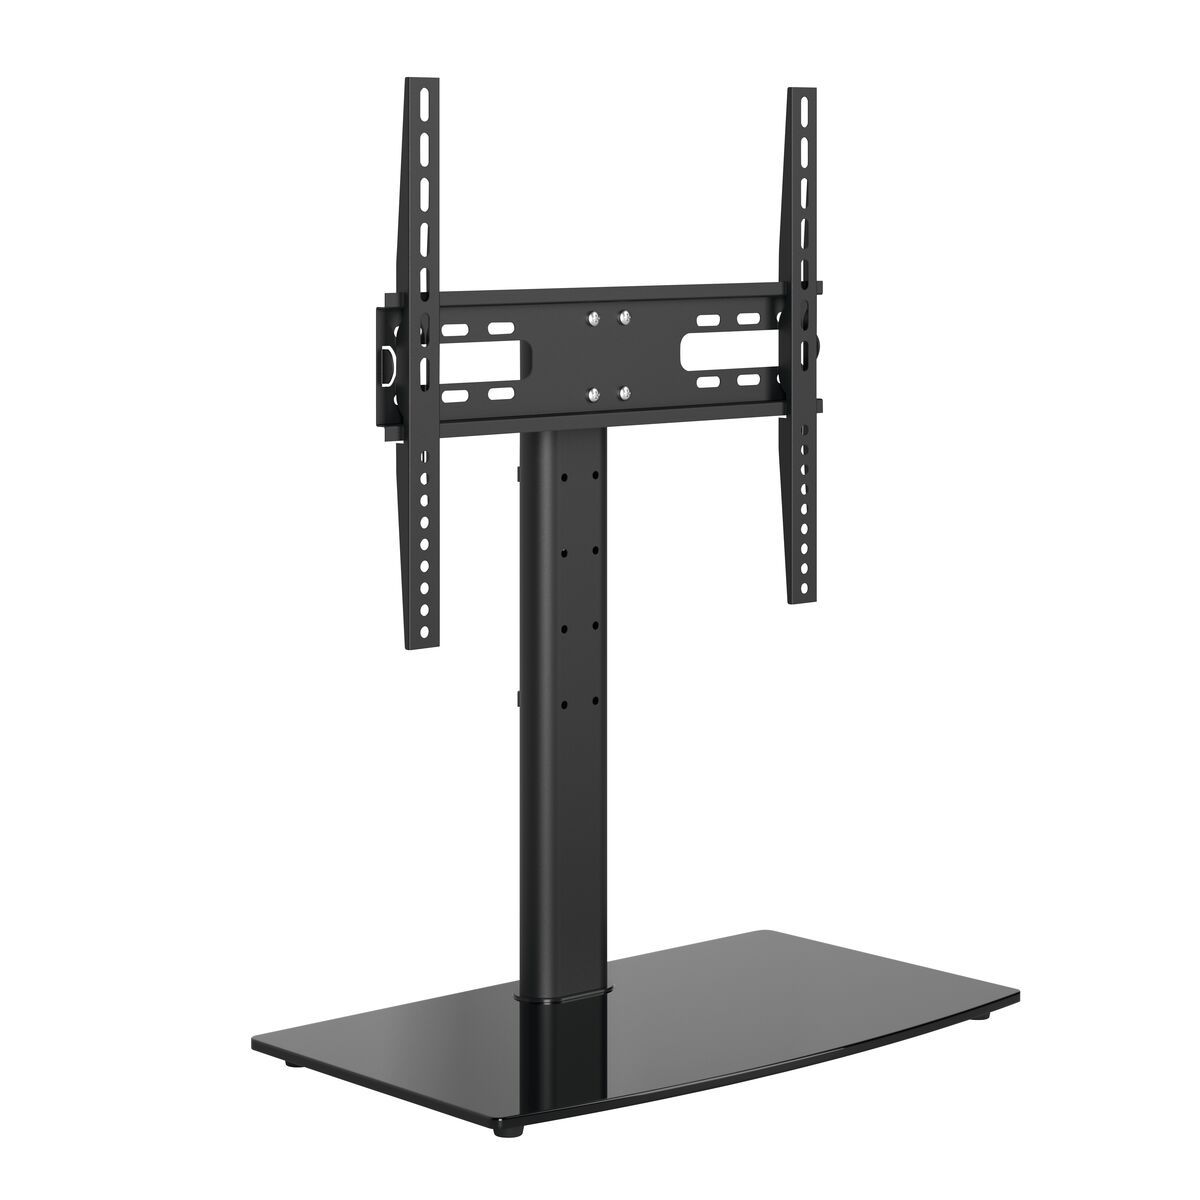 Vogel's MS3085 Tabletop TV stand - Suitable for 32 up to 65 inch TVs - Up to 50° swivel - Product